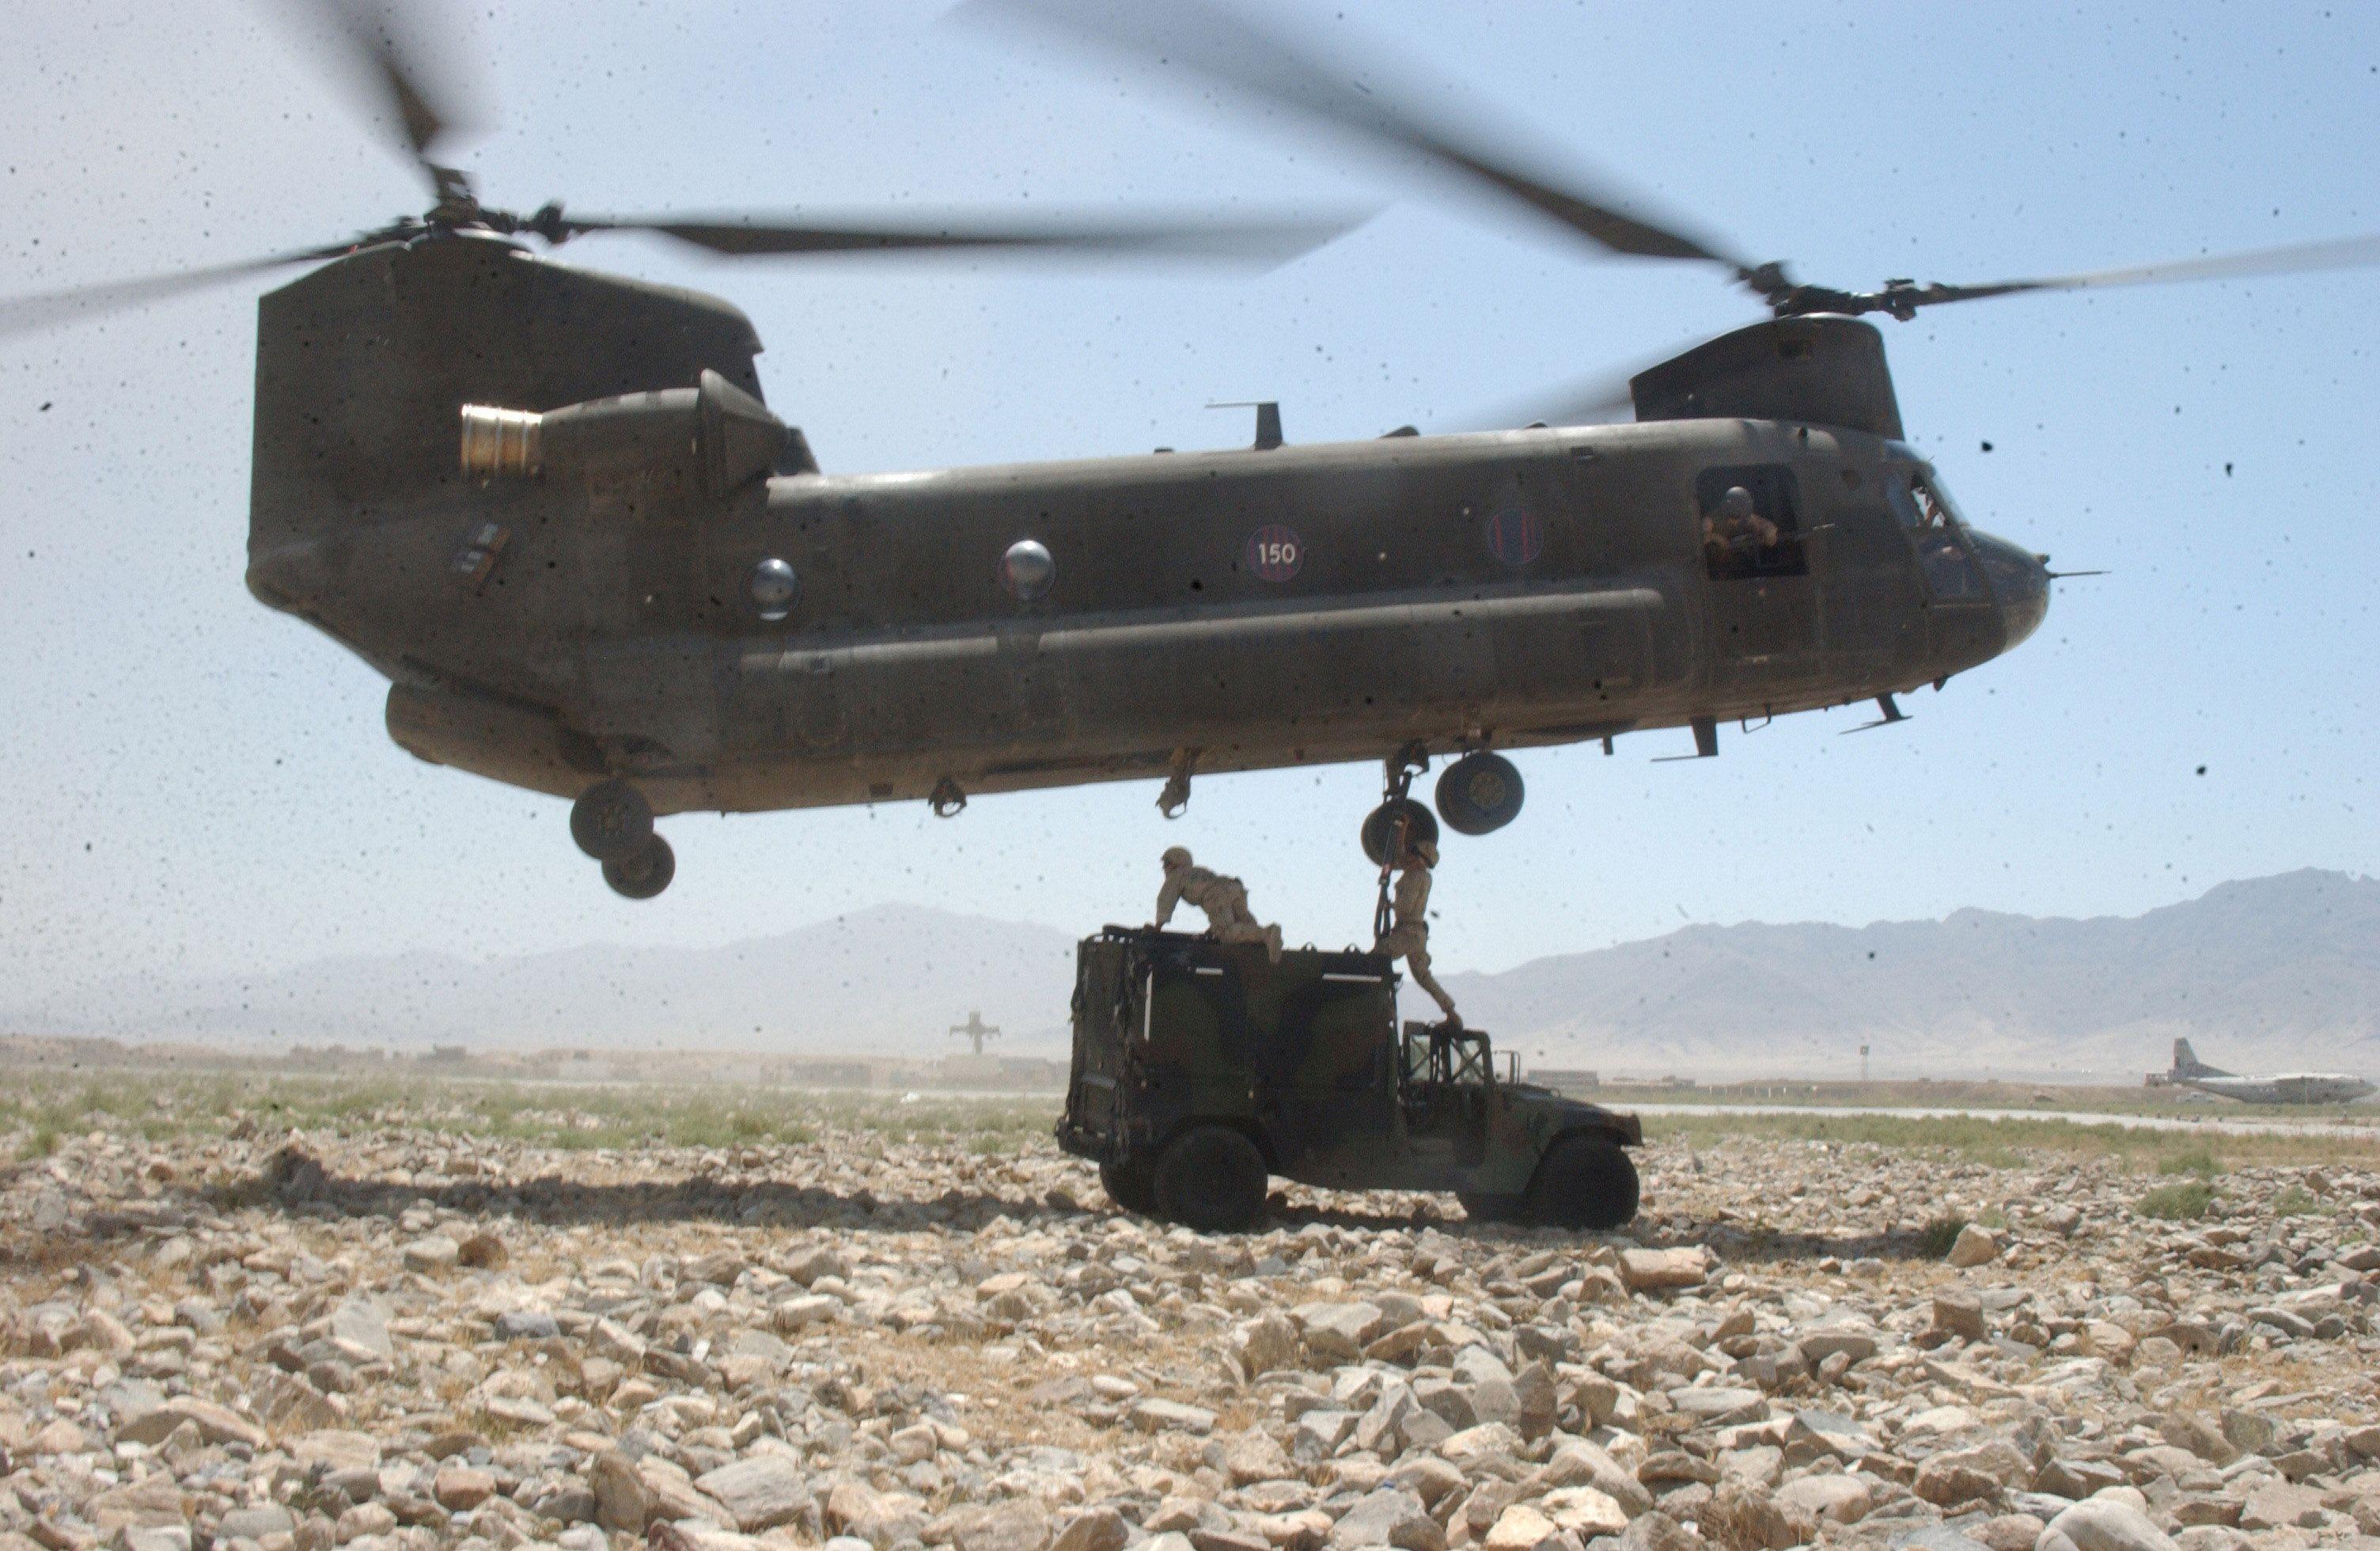 Army Chinook Helicopter to Fly for 100 Years